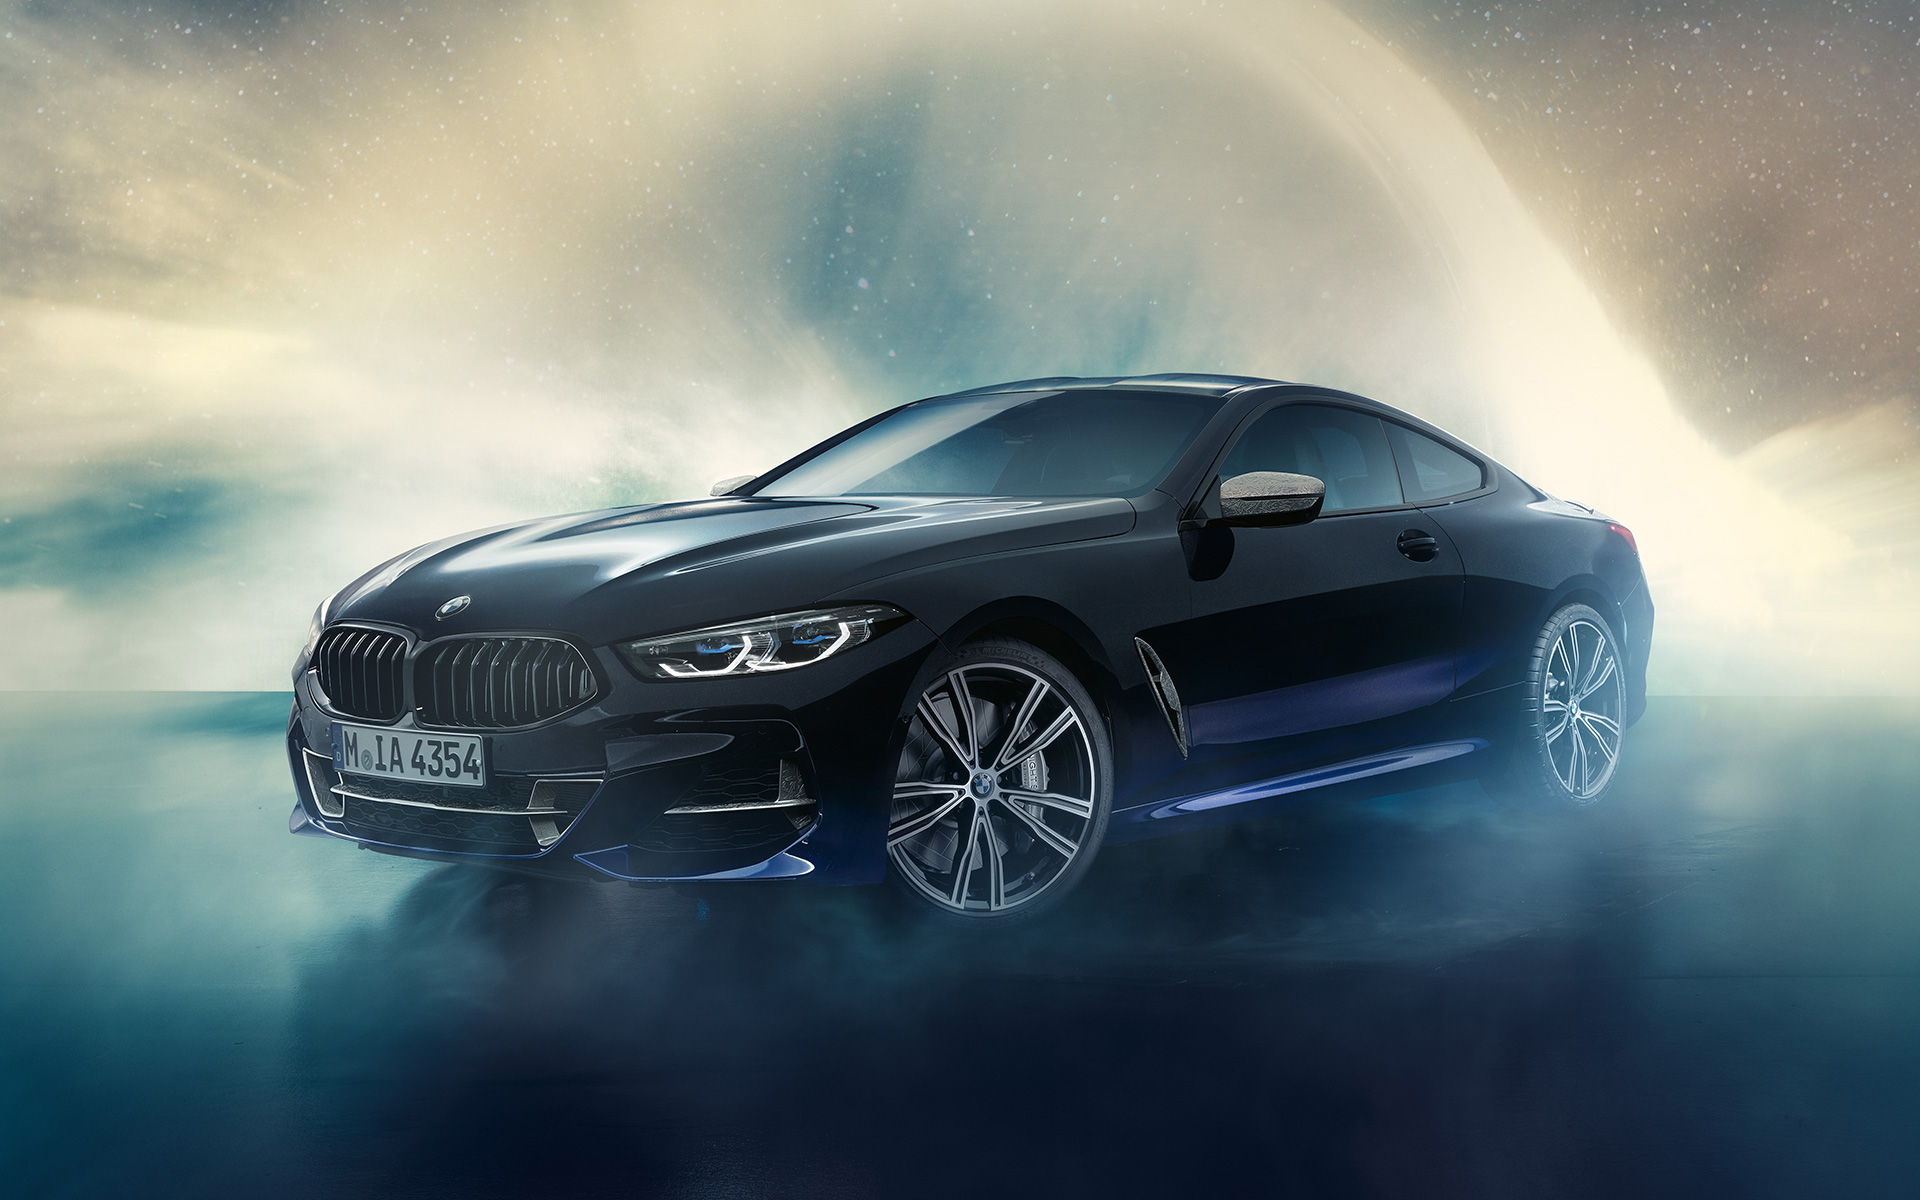 BMW Individual M850i NIGHT SKY G15 2019 three-quarter front view in front of meteor shower